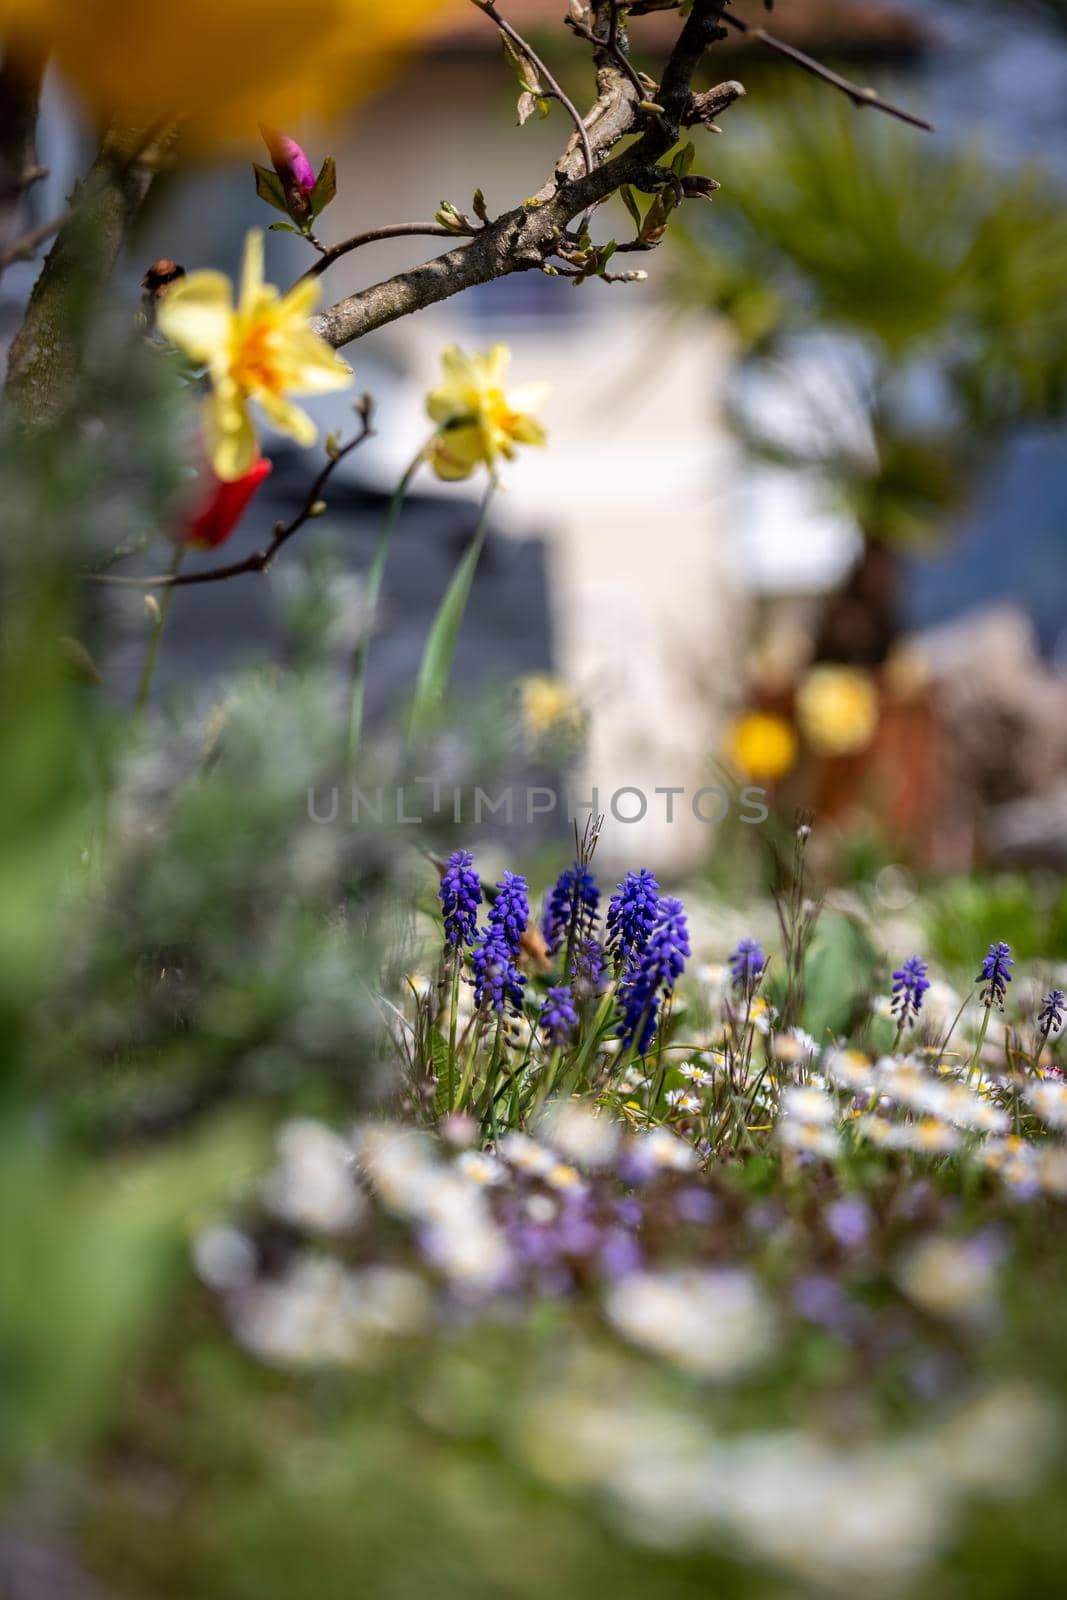 Spring time flower scenery: Colorful spring flowers by Daxenbichler